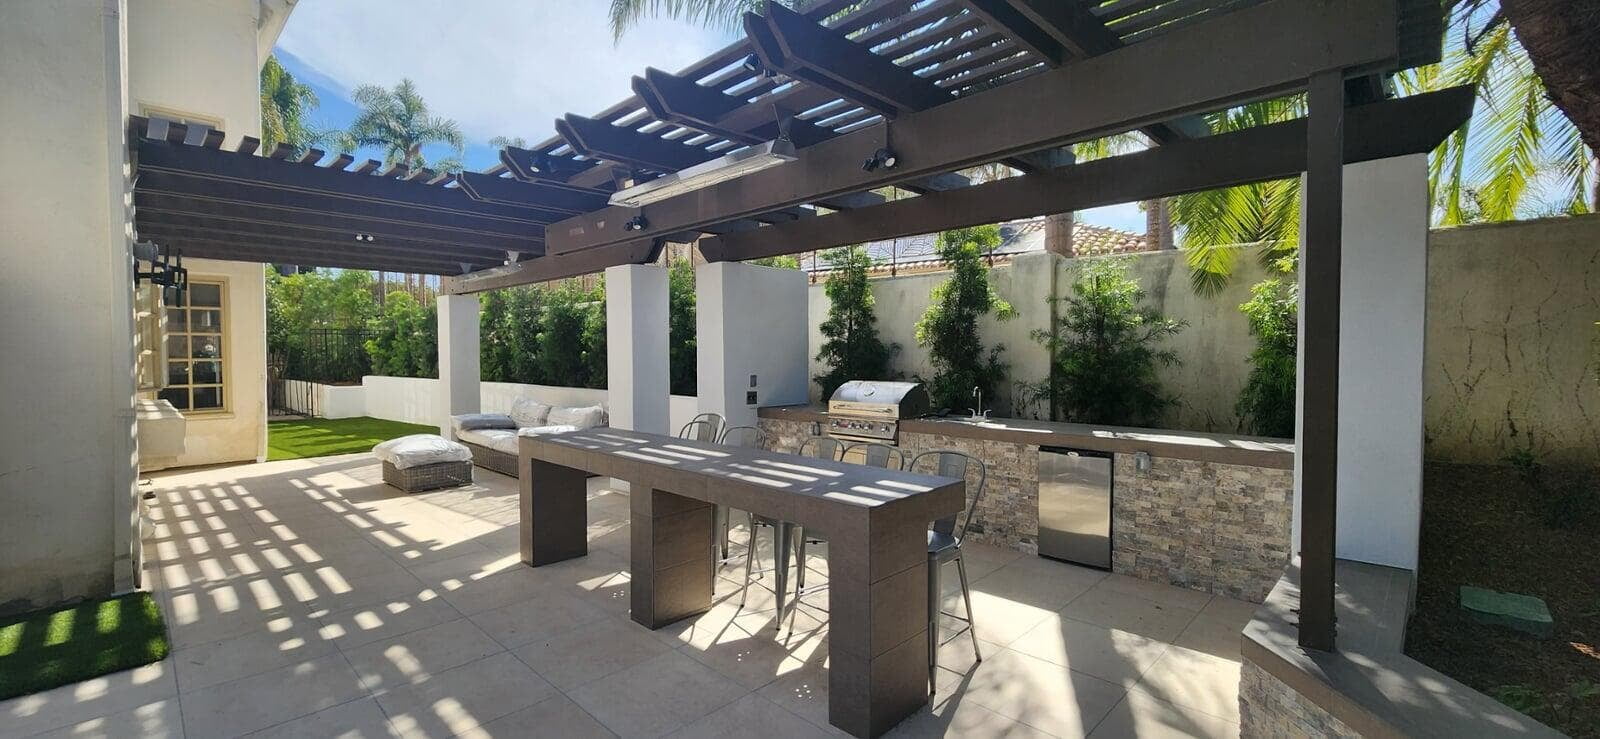 Outdoor Living Kitchen, BBQ, Patio Cover